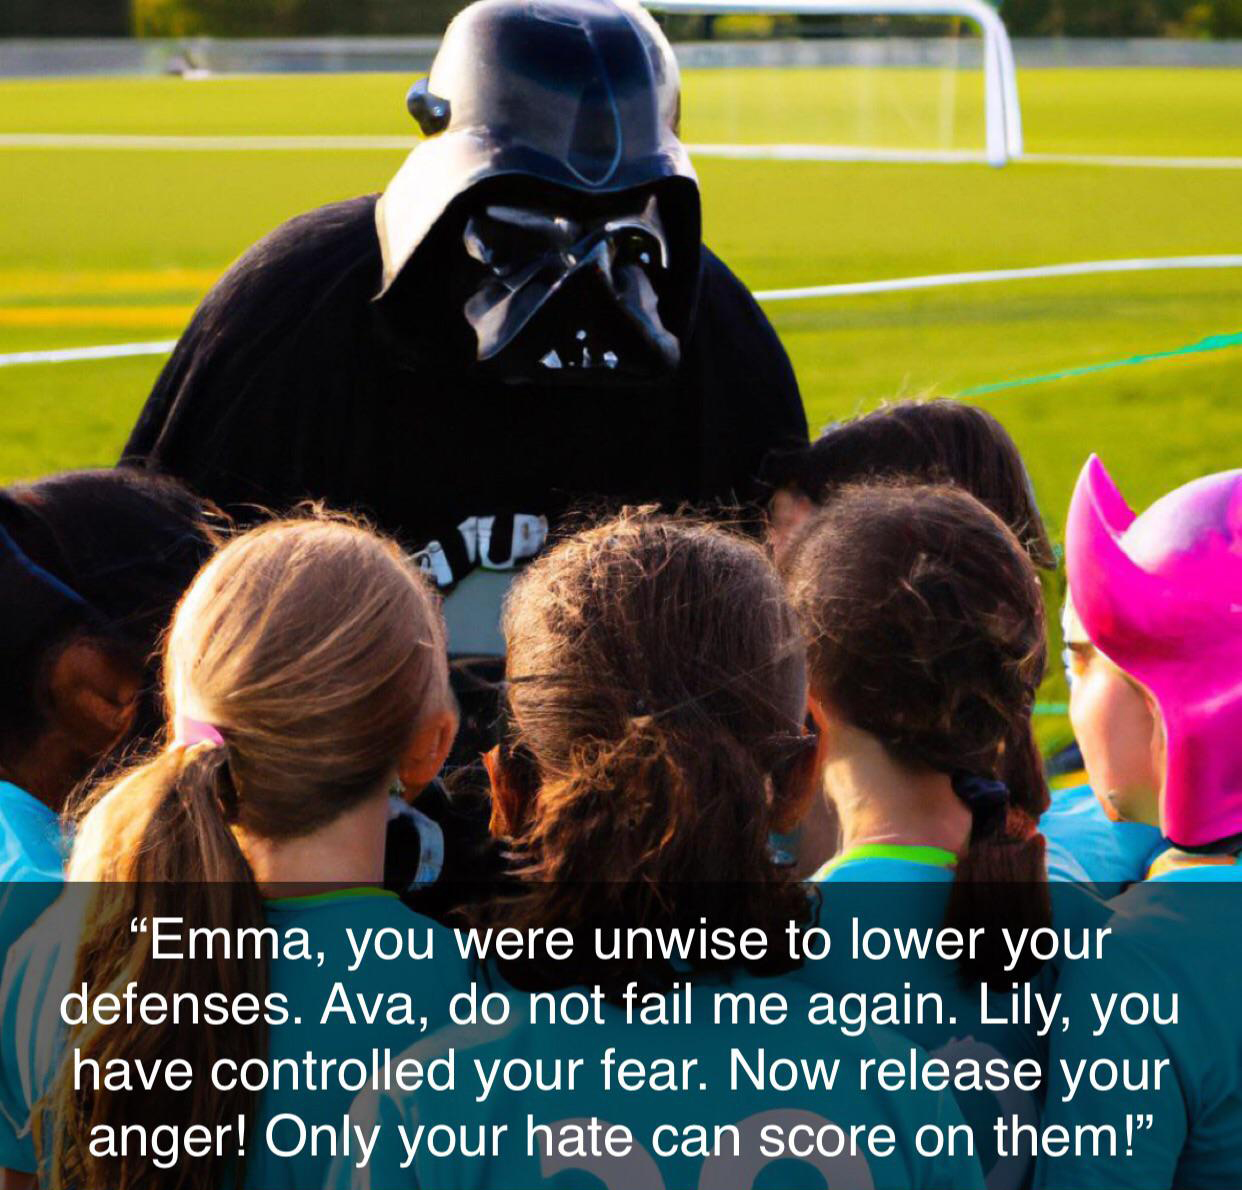 dank memes - community - Tup "Emma, you were unwise to lower your defenses. Ava, do not fail me again. Lily, you have controlled your fear. Now release your anger! Only your hate can score on them!"